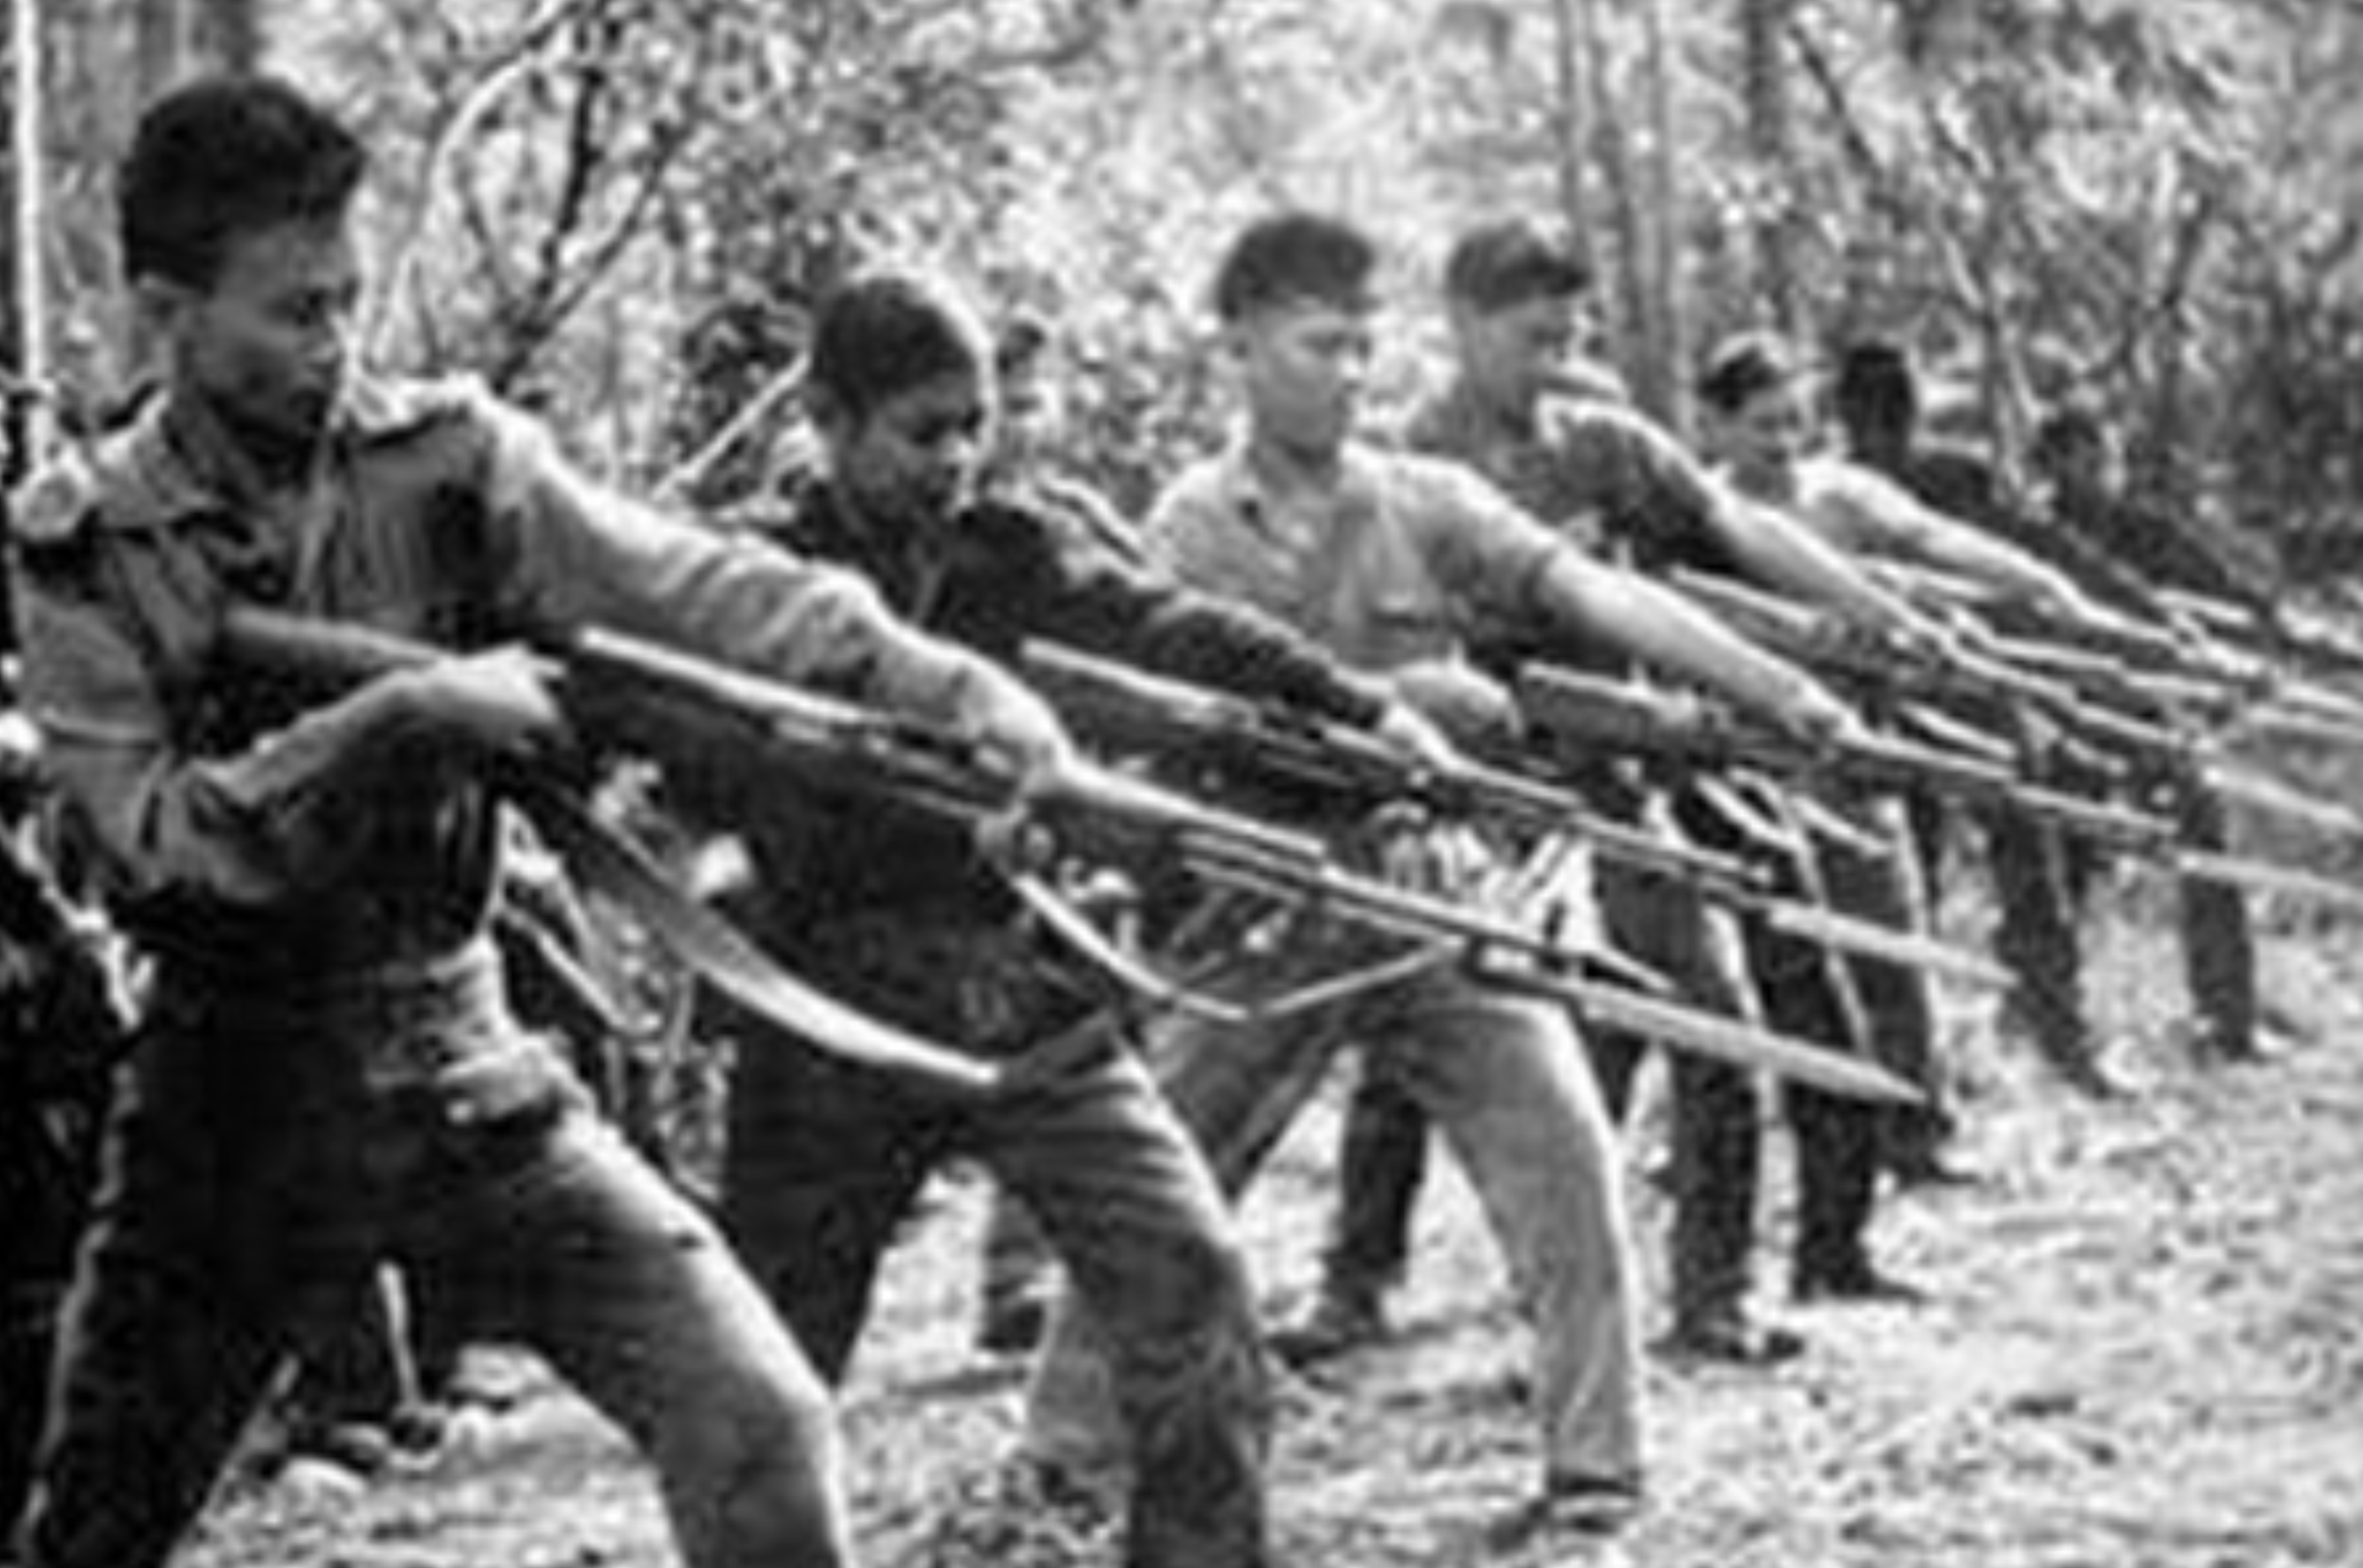 Vietnamese troops with AK47s